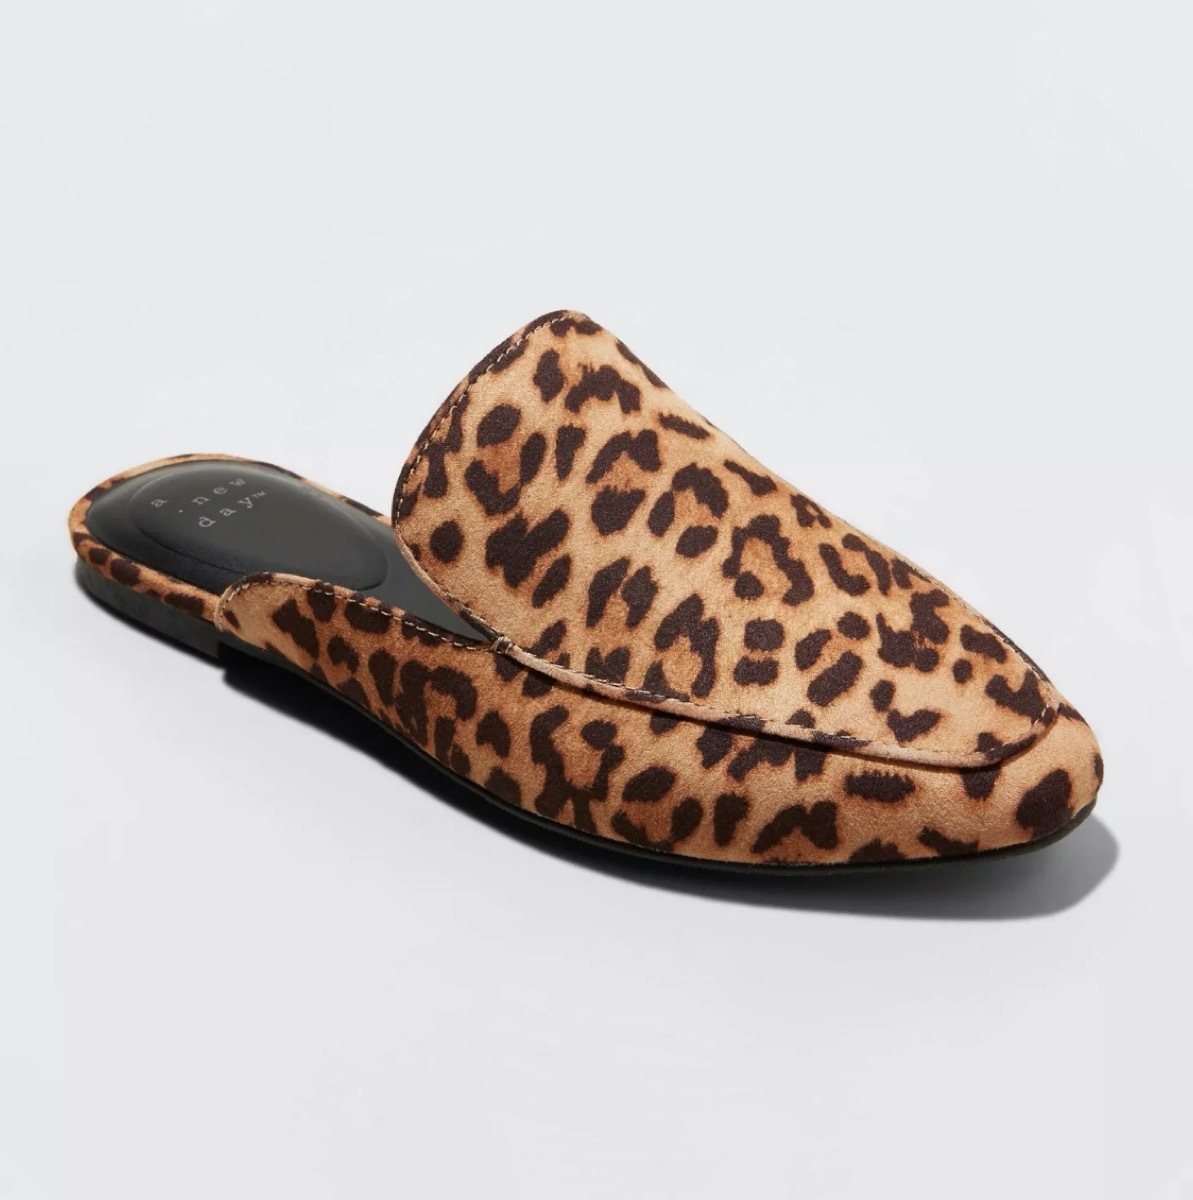 leopard print slide shoes on white background